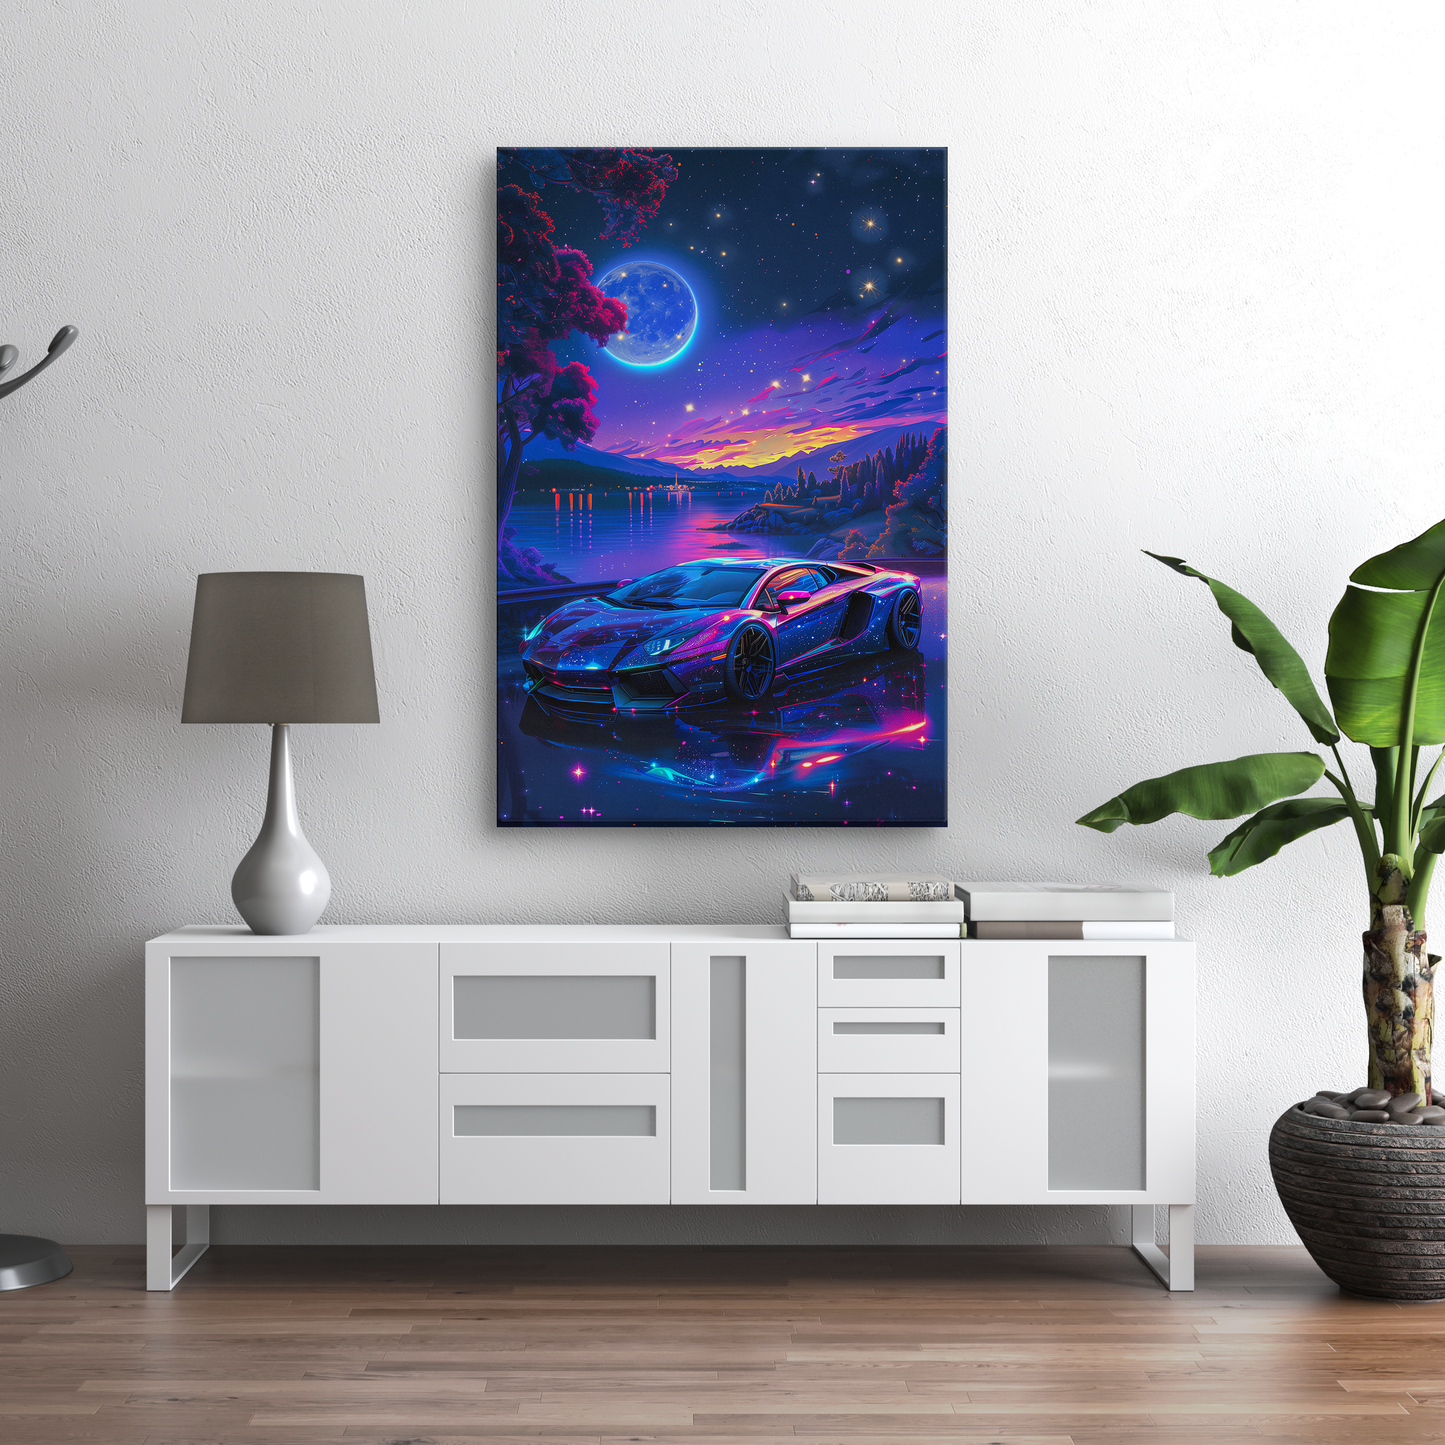 Cosmic Cruise (Canvas)Discover Tangerine Grid at RimaGallery: a premium, eco-friendly canvas celebrating quality and sustainability. Elevate your space with vibrant, lasting art.RimaGallery